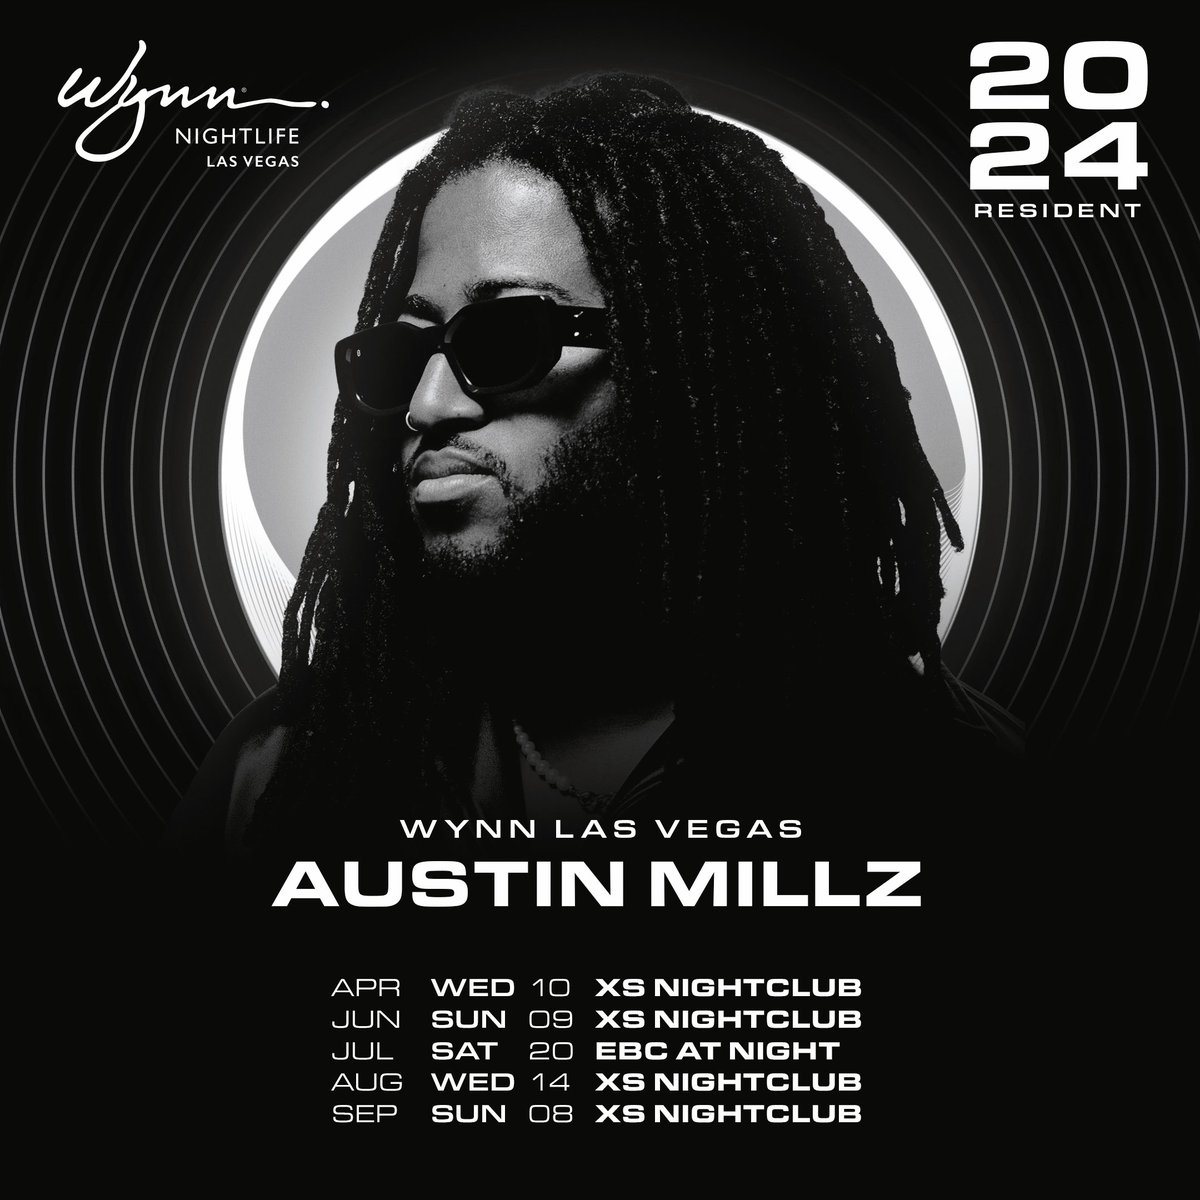 Excited to announce my debut Las Vegas residency at The Wynn Las Vegas! Can't wait to see everyone this year!